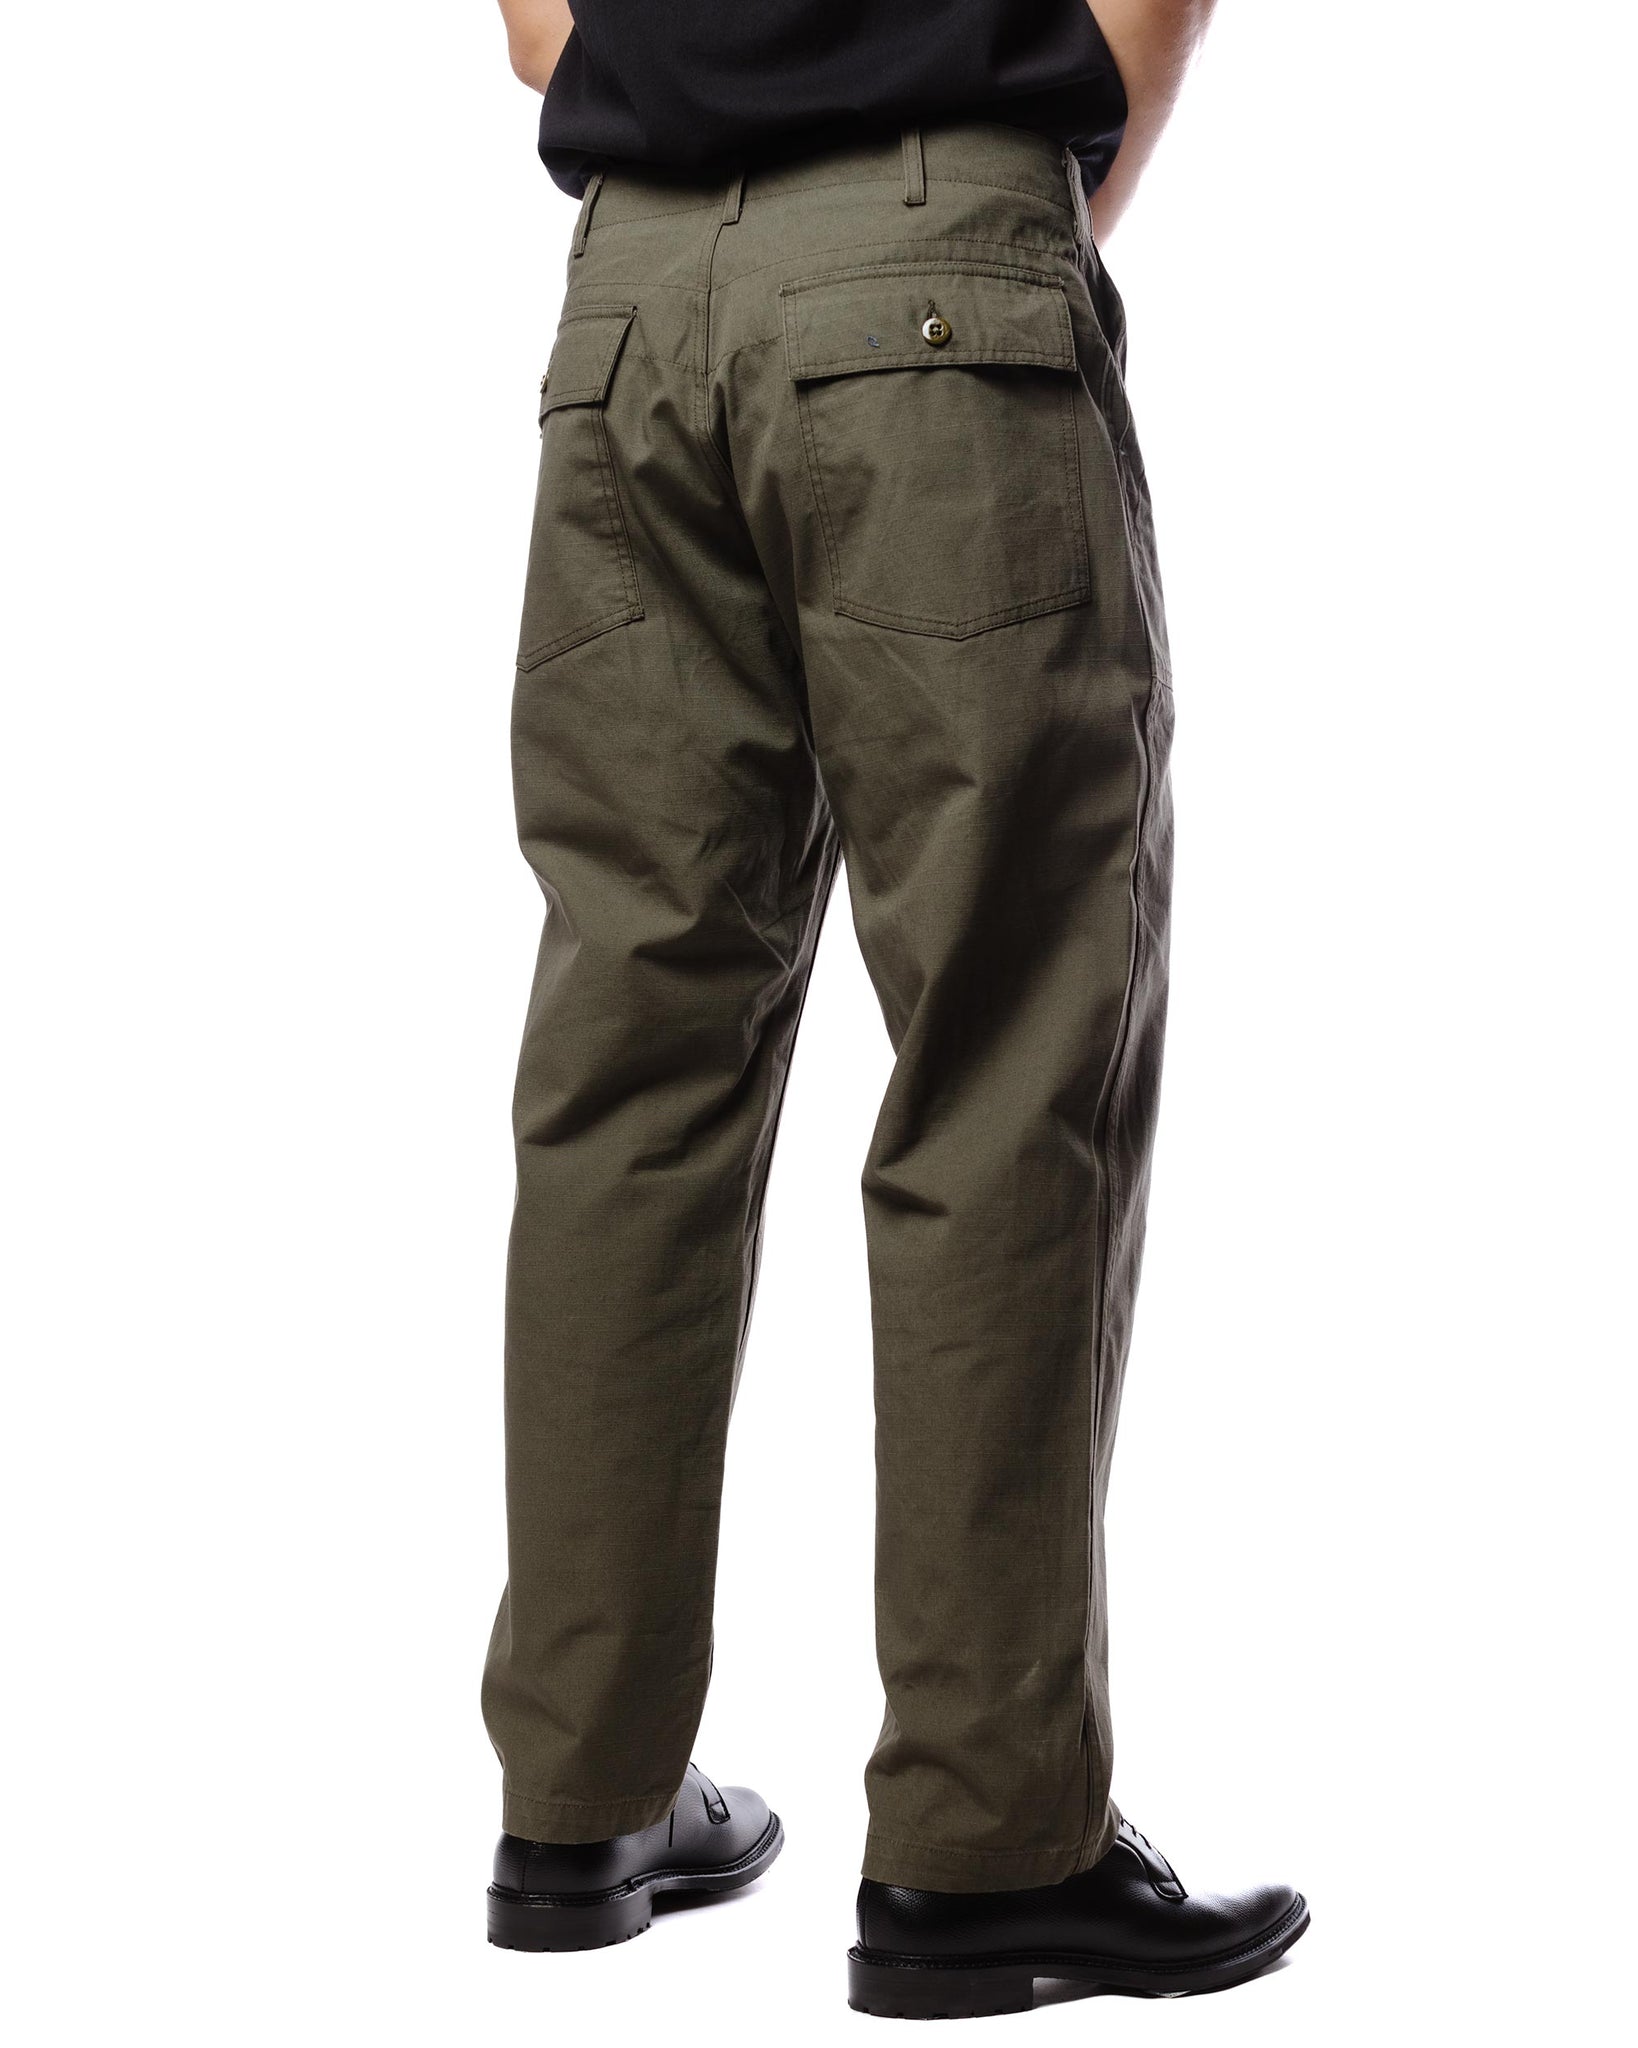 Engineered Garments Fatigue Pant Olive Heavyweight Cotton Ripstop Model Rear